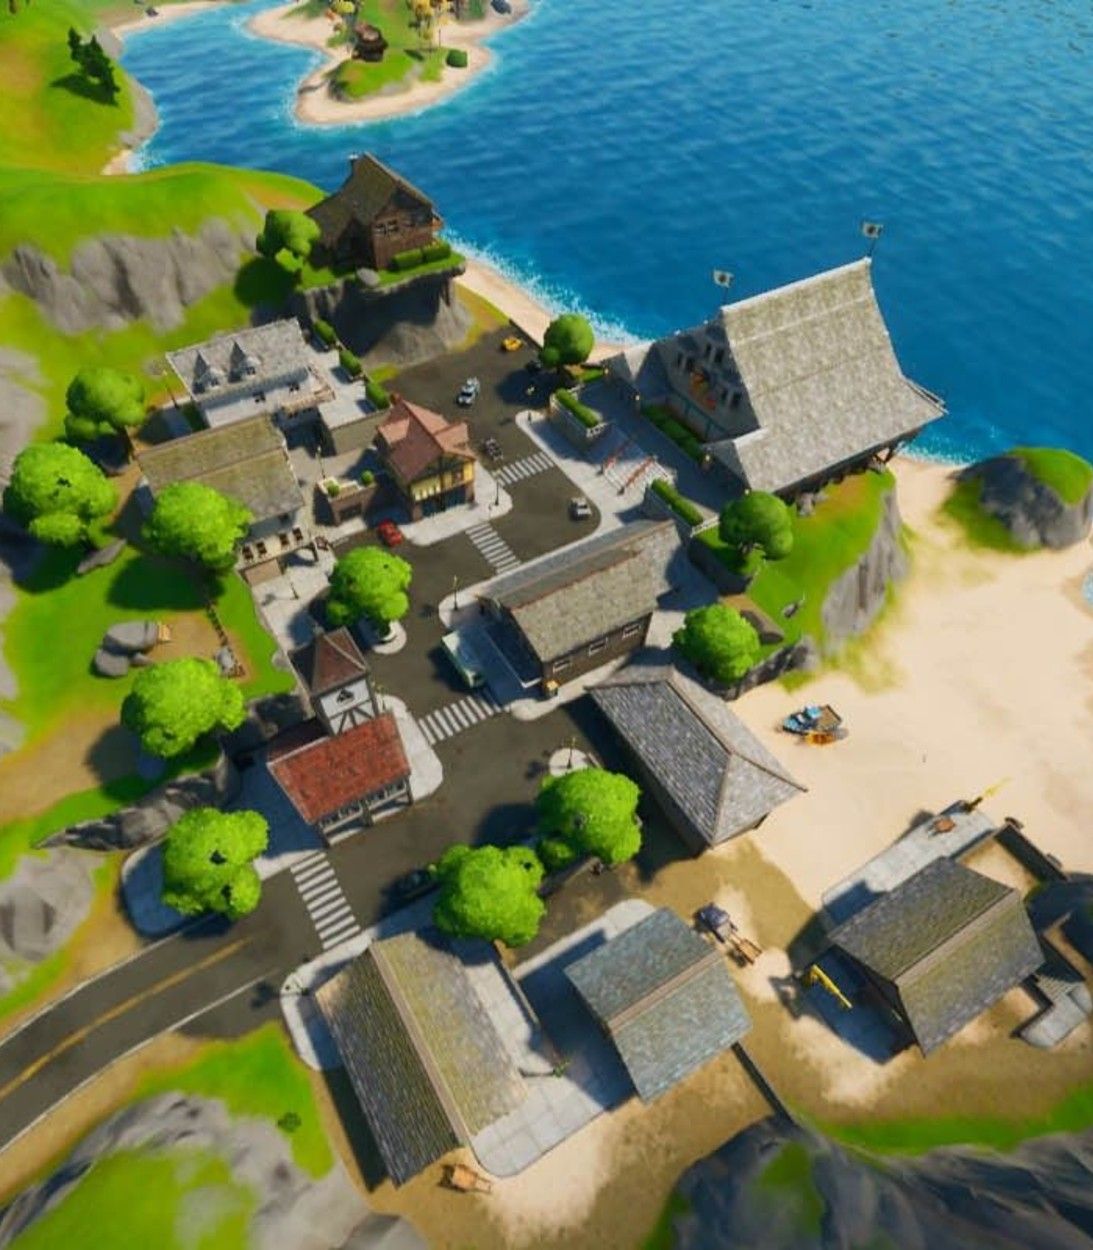 The beachfront town in Craggy Cliffs in Fortnite